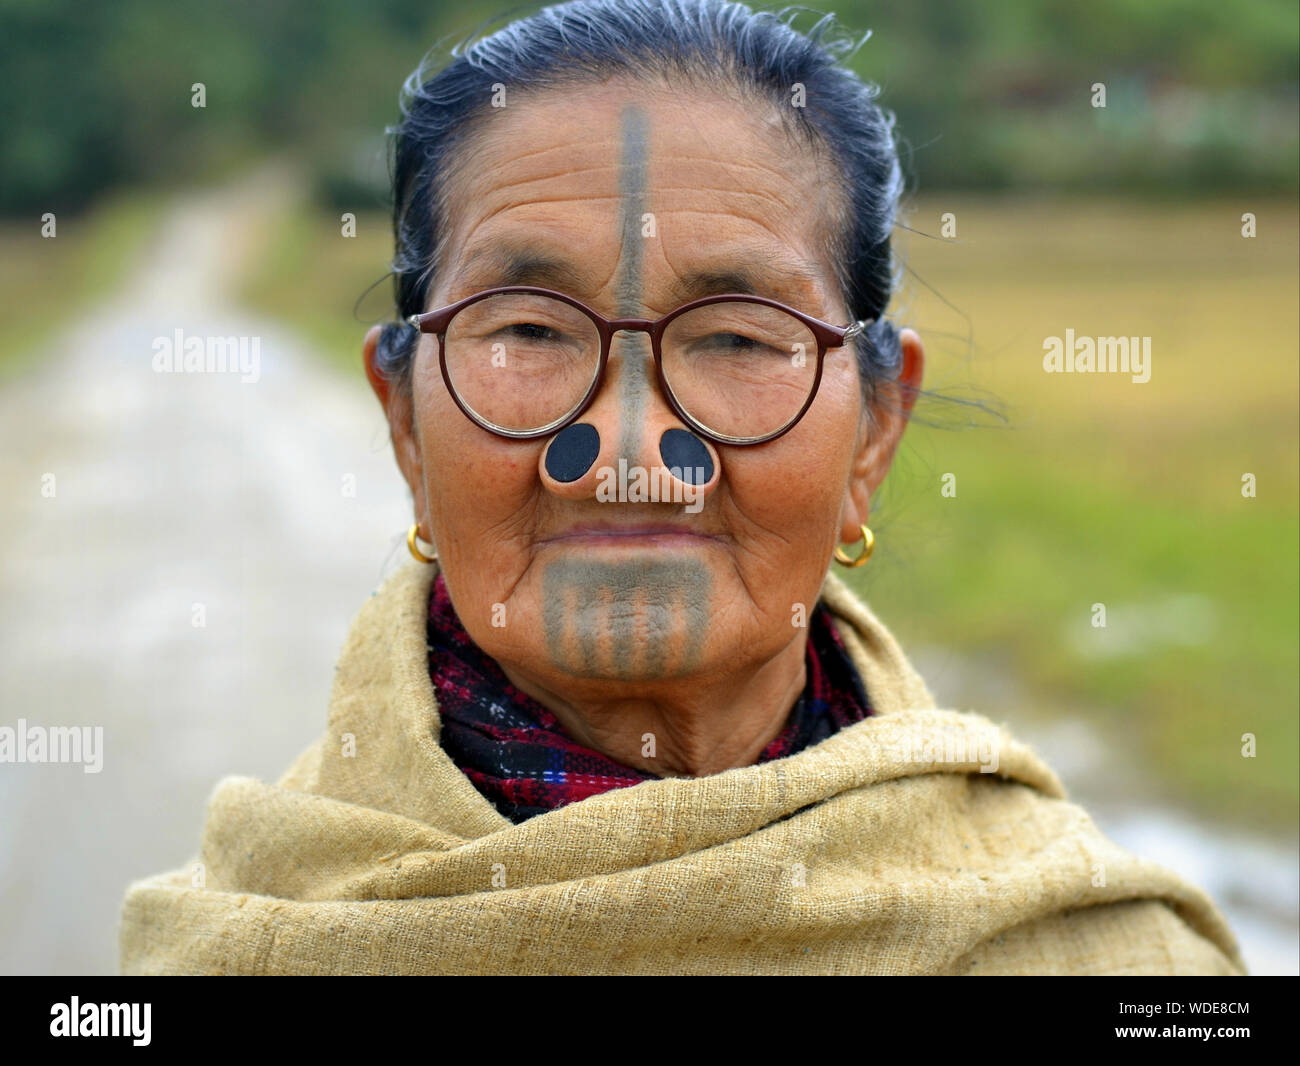 Elderly Indian Apatani tribal woman with black wooden nose plugs (yaping hullo) and distinctive tribal face tattoo poses for the camera. Stock Photo